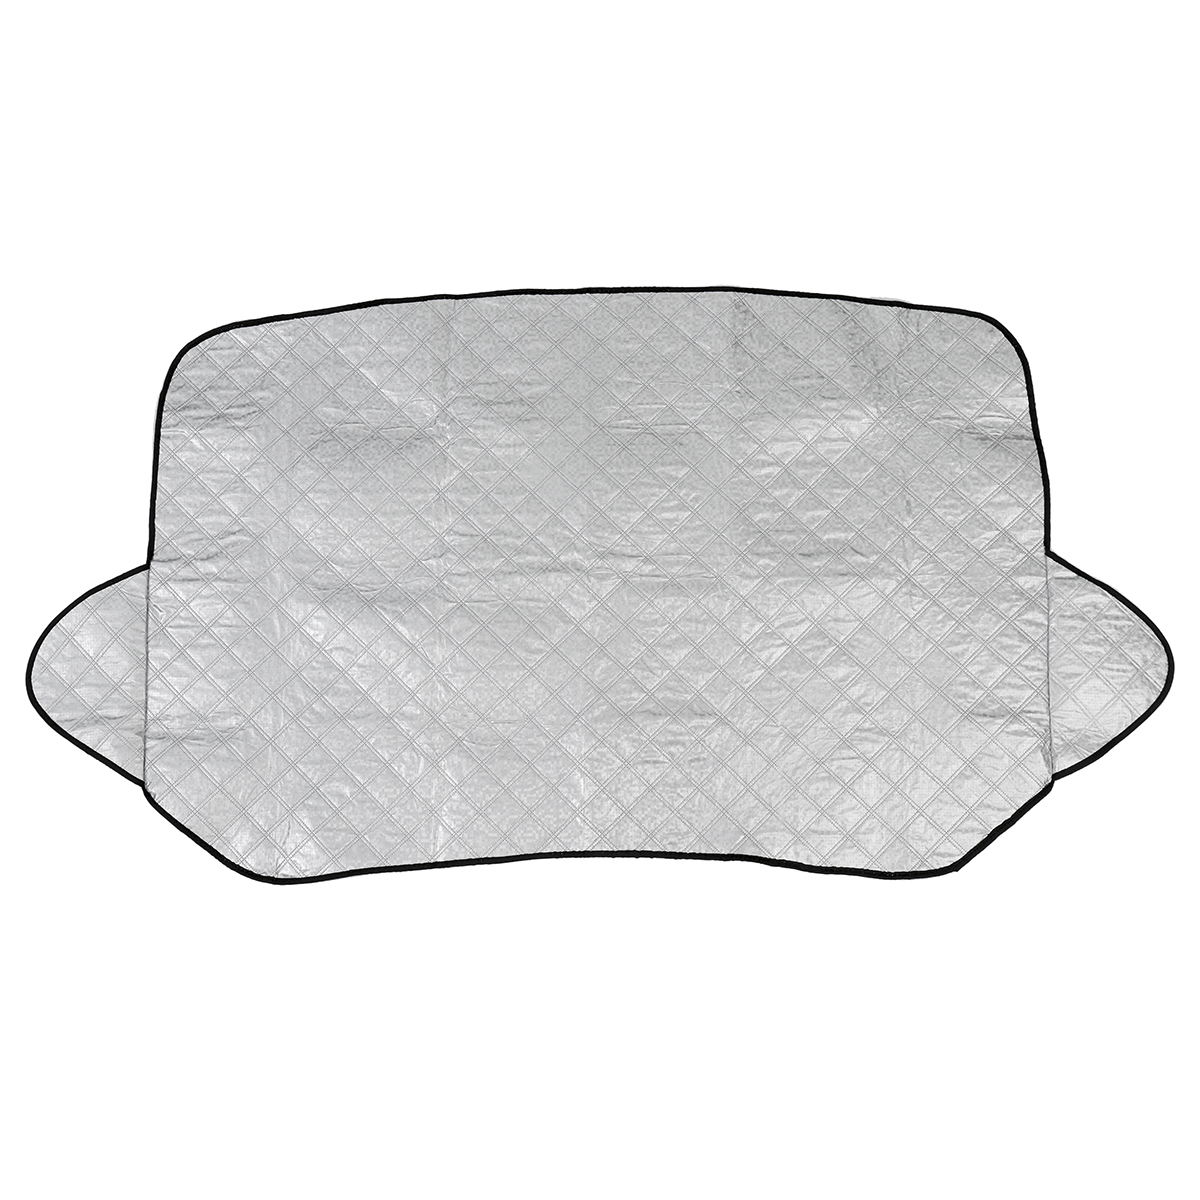 Car SUV Windshield Cover Snow Ice Dust Frost Sunshade Protector Shield Winter